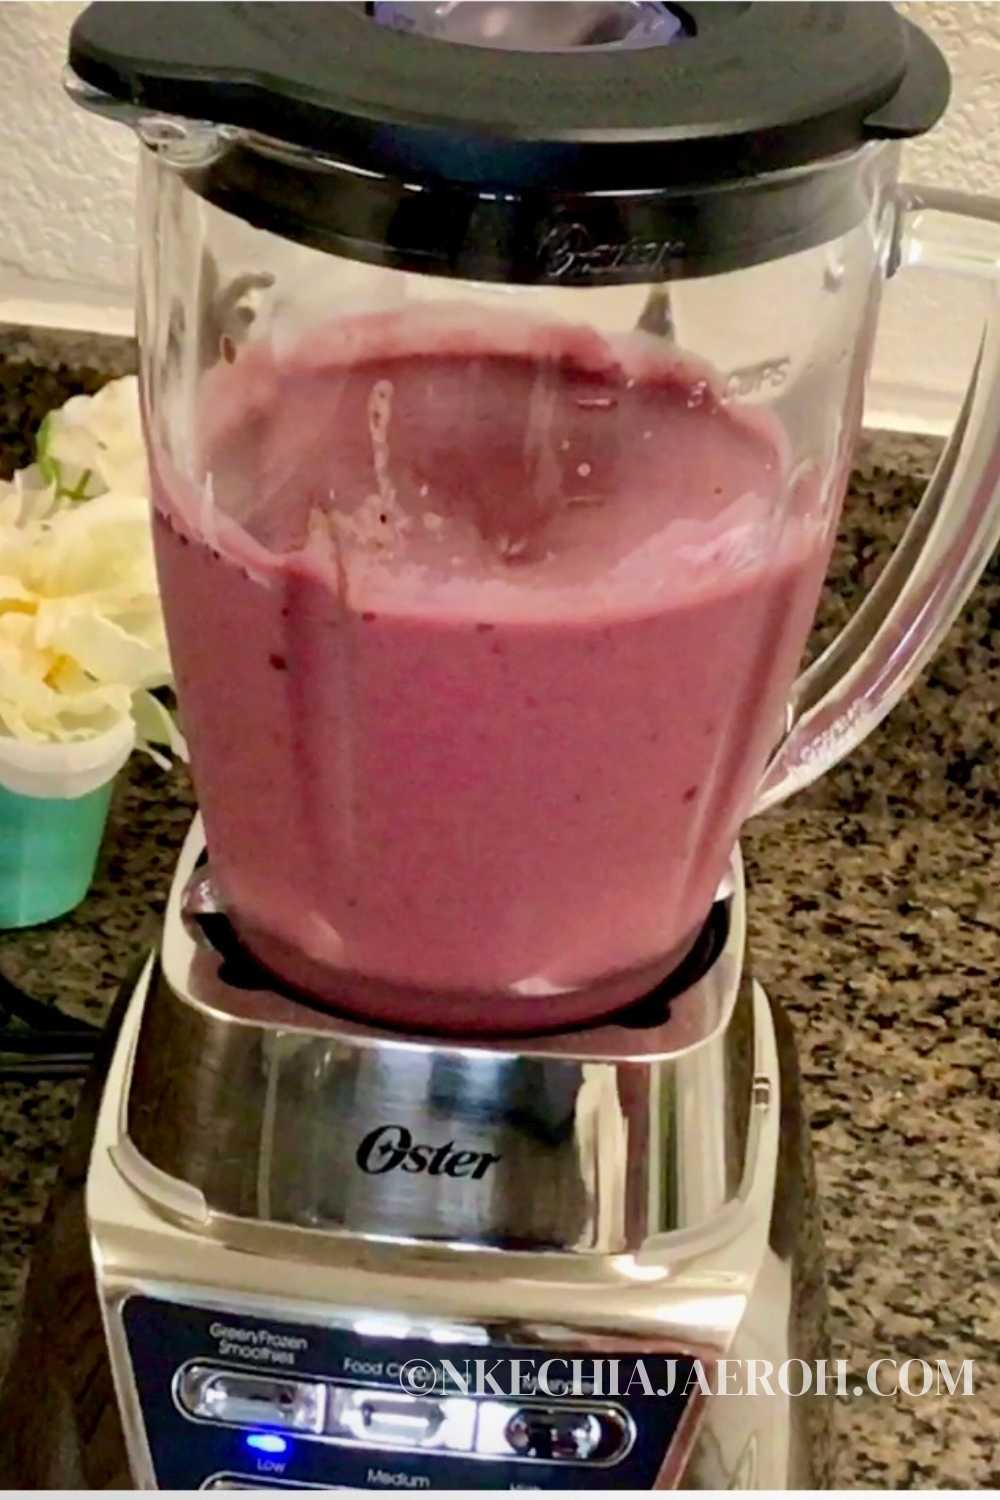 Once all ingredients have been added to the blender, power it on. You’ll want to blend it until it comes out smooth and creamy.